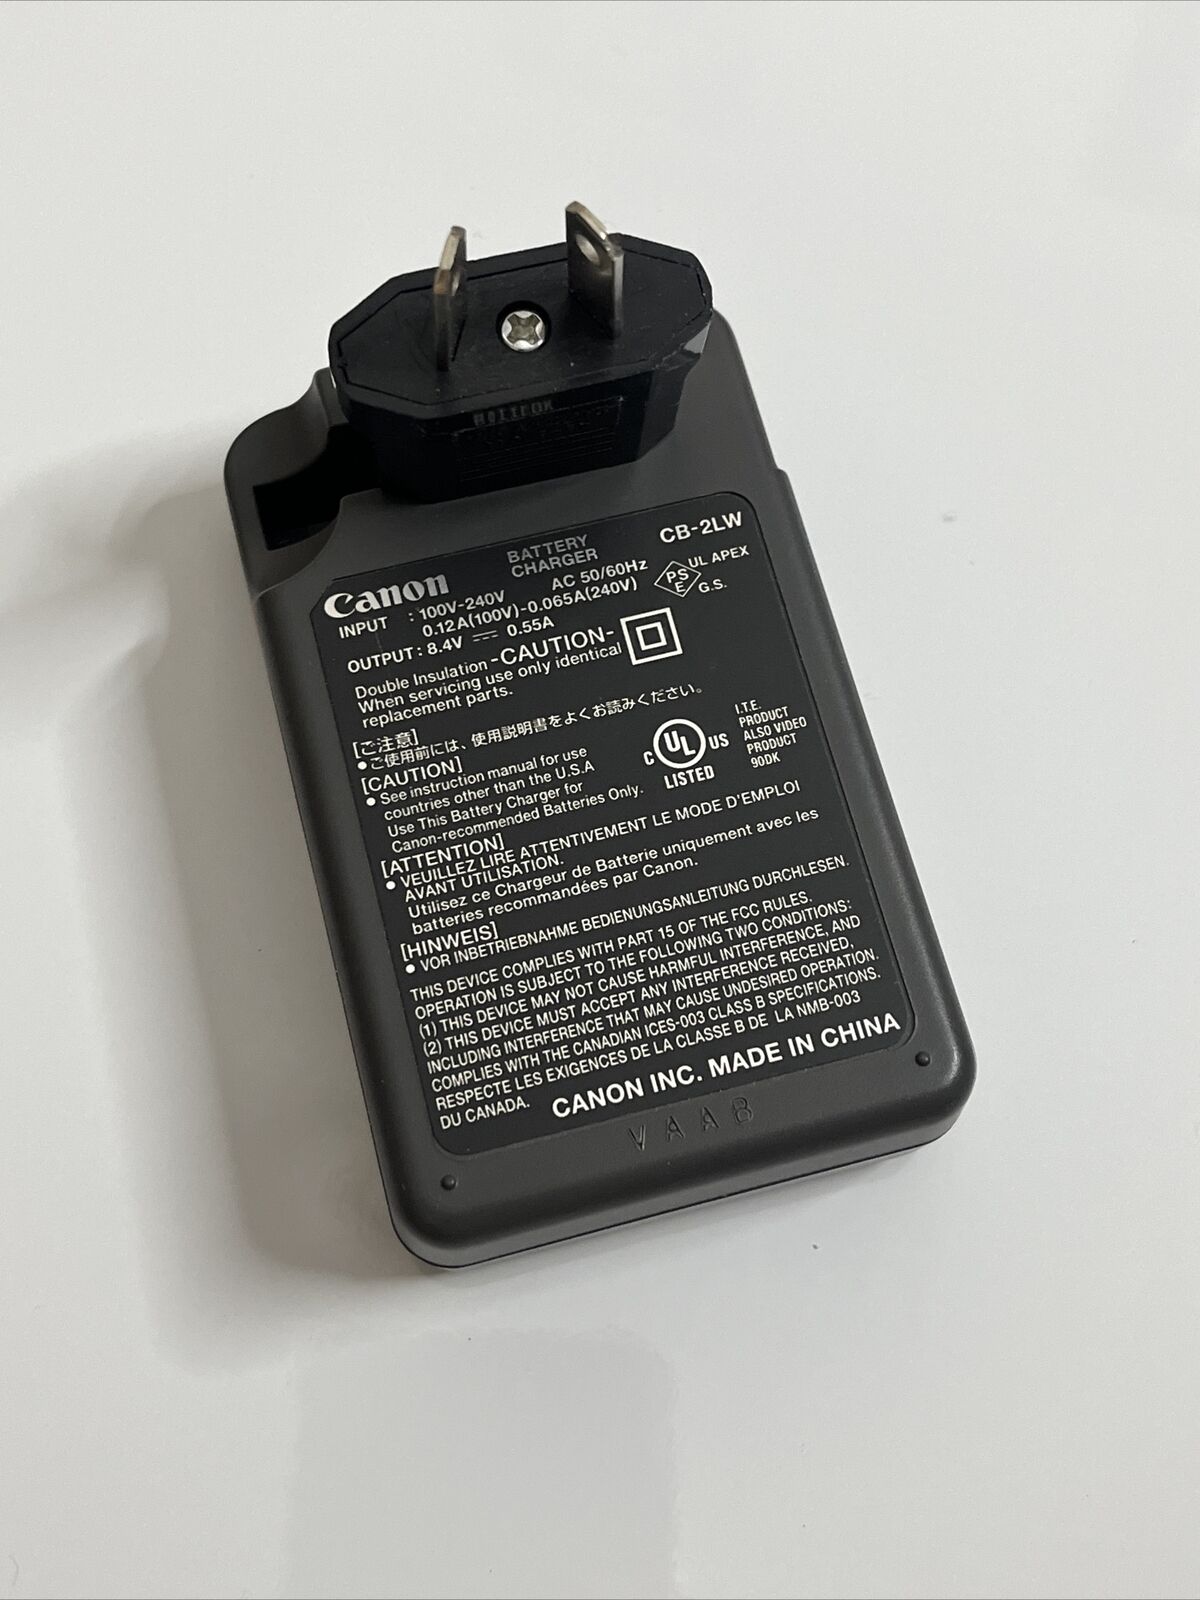 Genuine Canon Battery Charger CB-2LW for NB-2L NB-2LH Batteries 100-240V